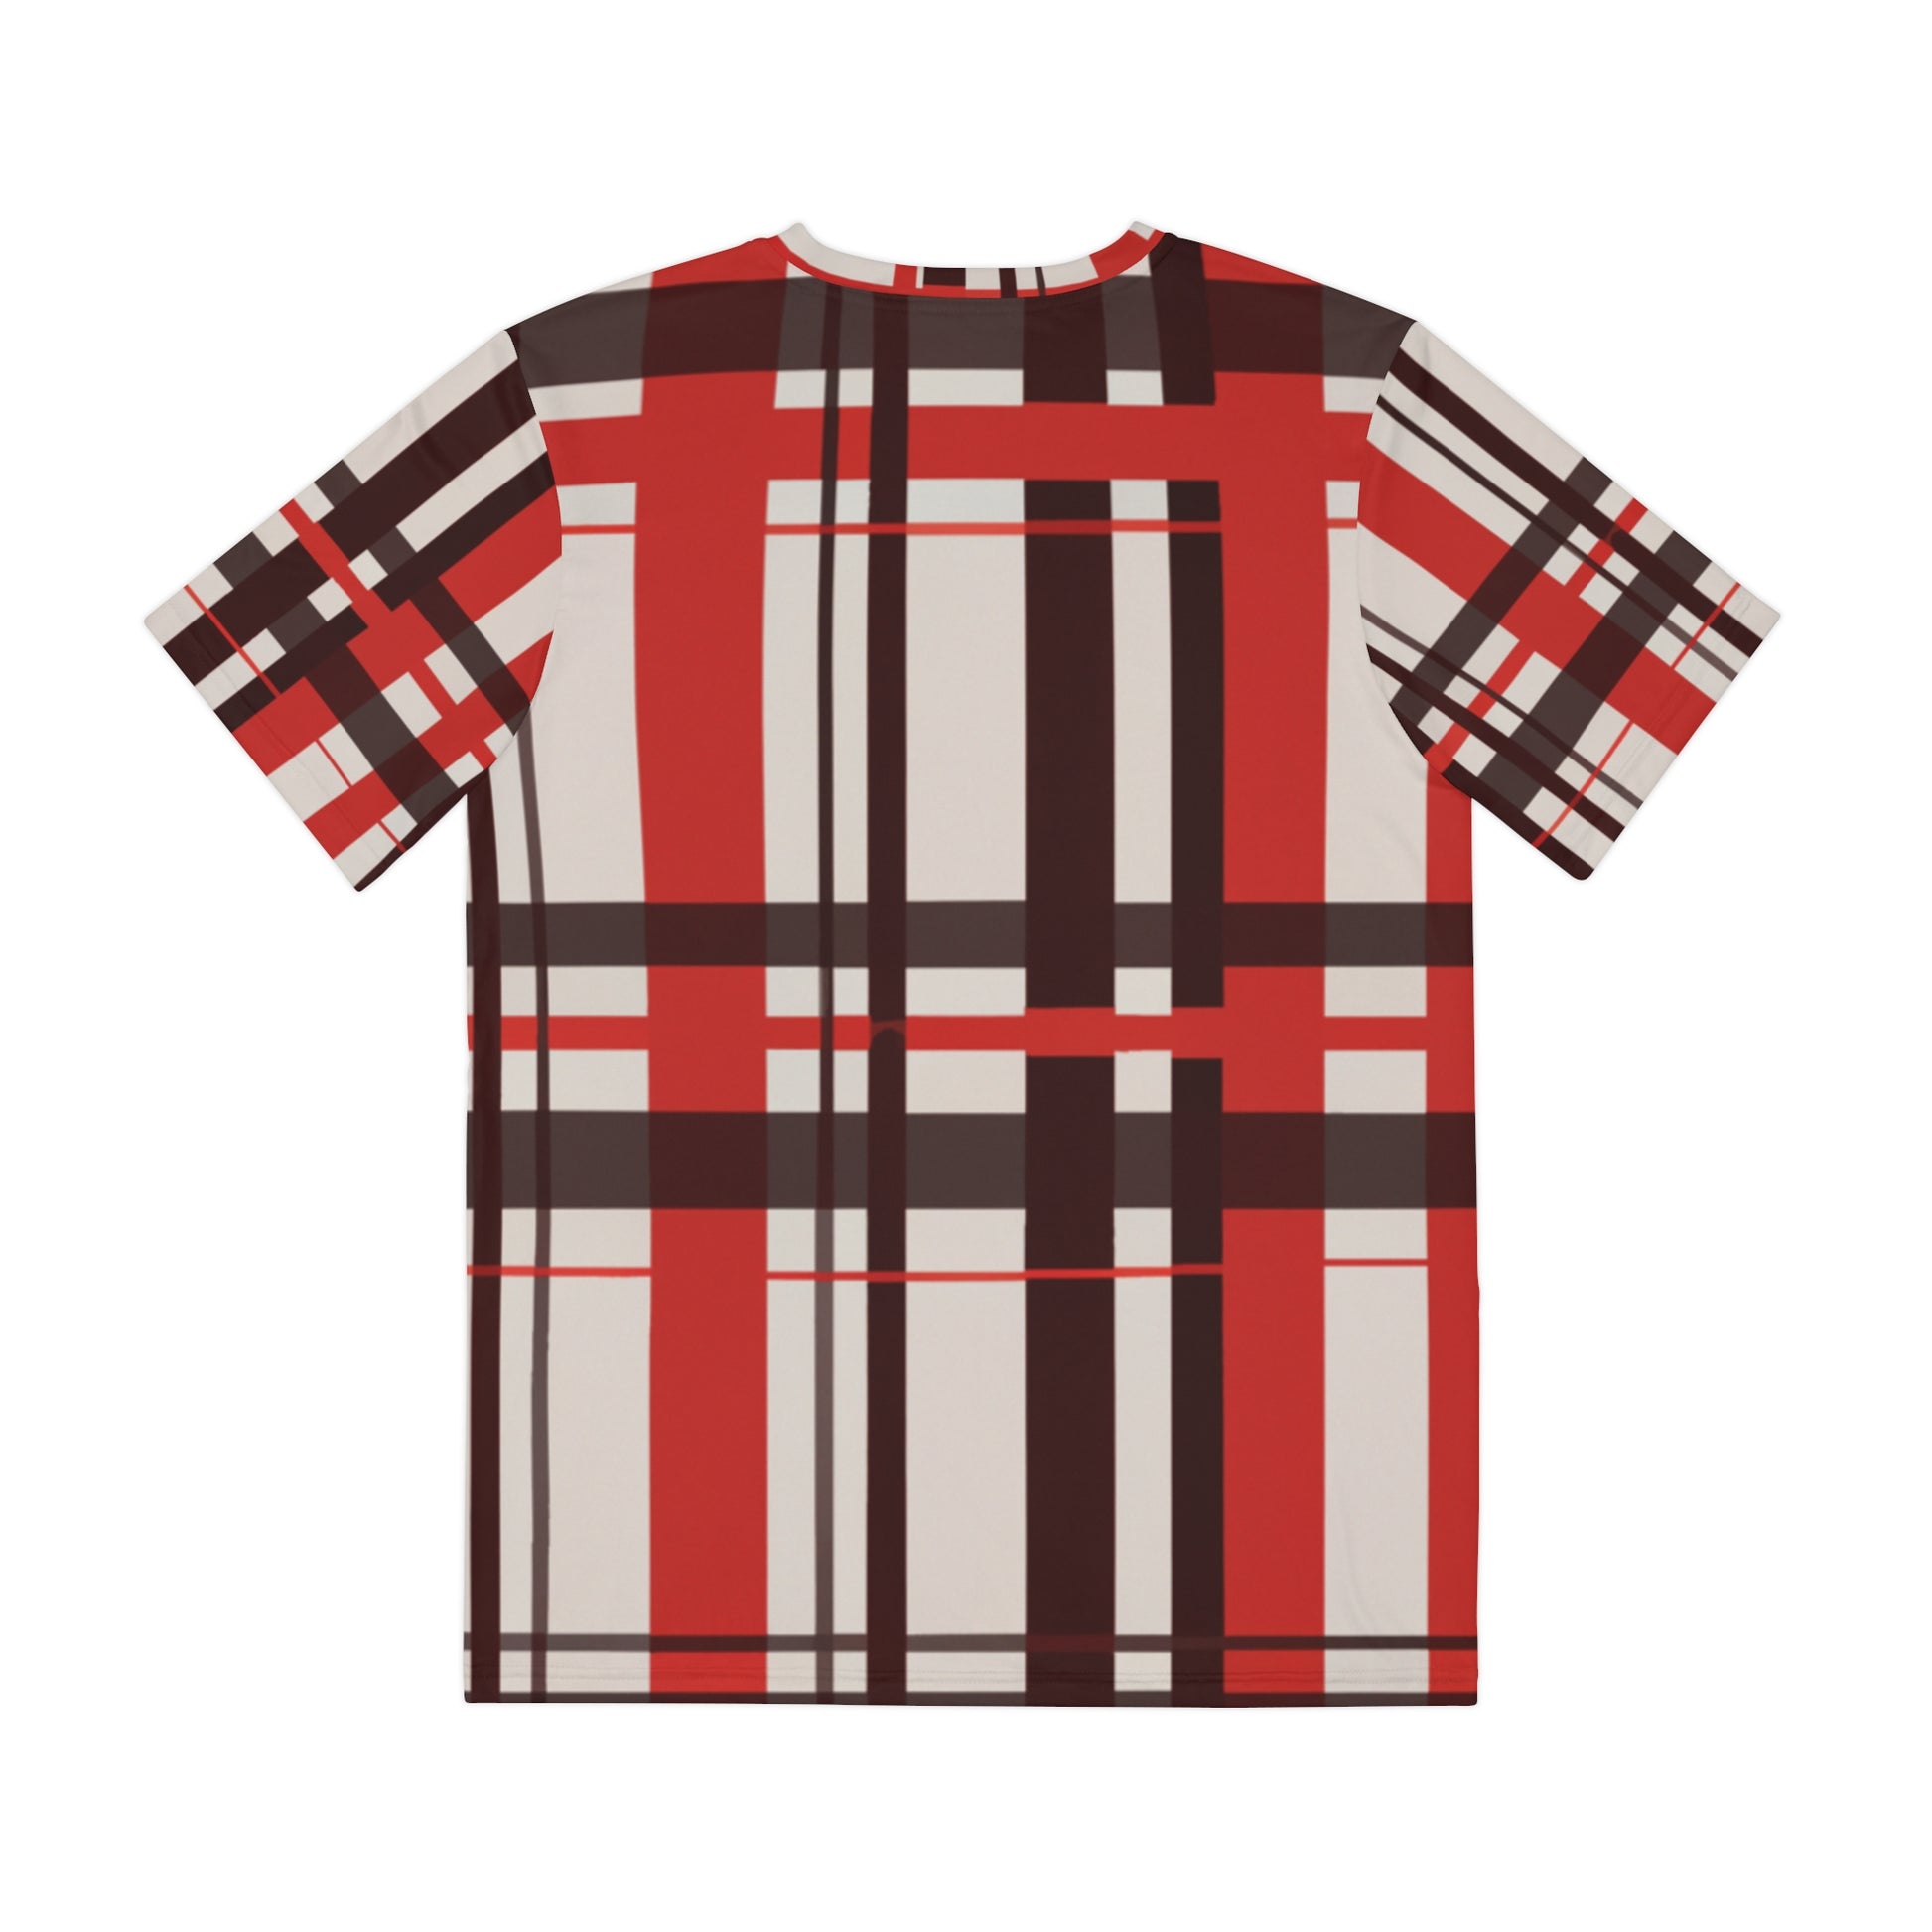 Back view of the Highland Ember Dawn Tartan Crewneck Pullover All-Over Print Short-Sleeved Shirt black red white plaid pattern 